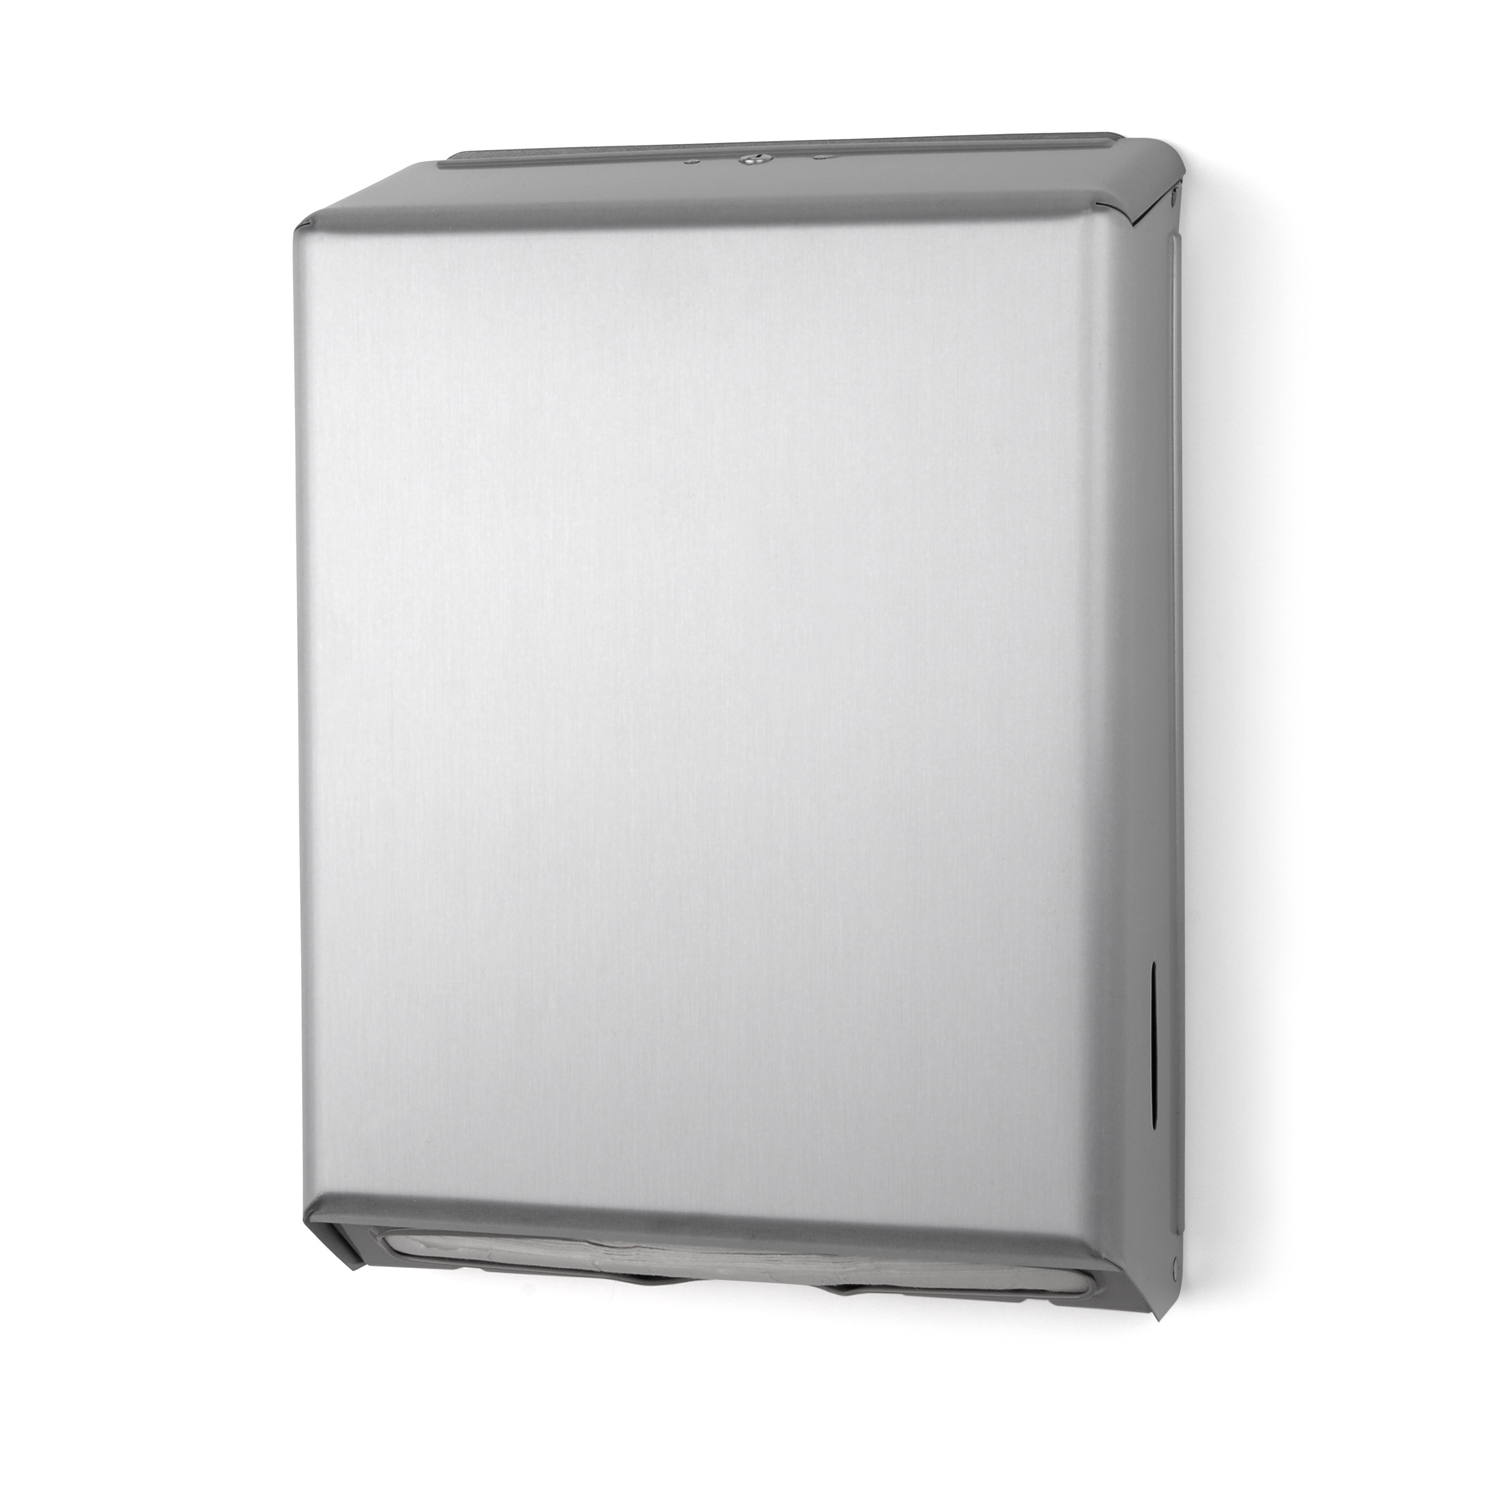 Multi-Fold/C-Fold Towel
stainless
Dispenser
durable steel with a side
window to view paper supply.
Provides easy towel removal
and reduces multiple
dispensing. 